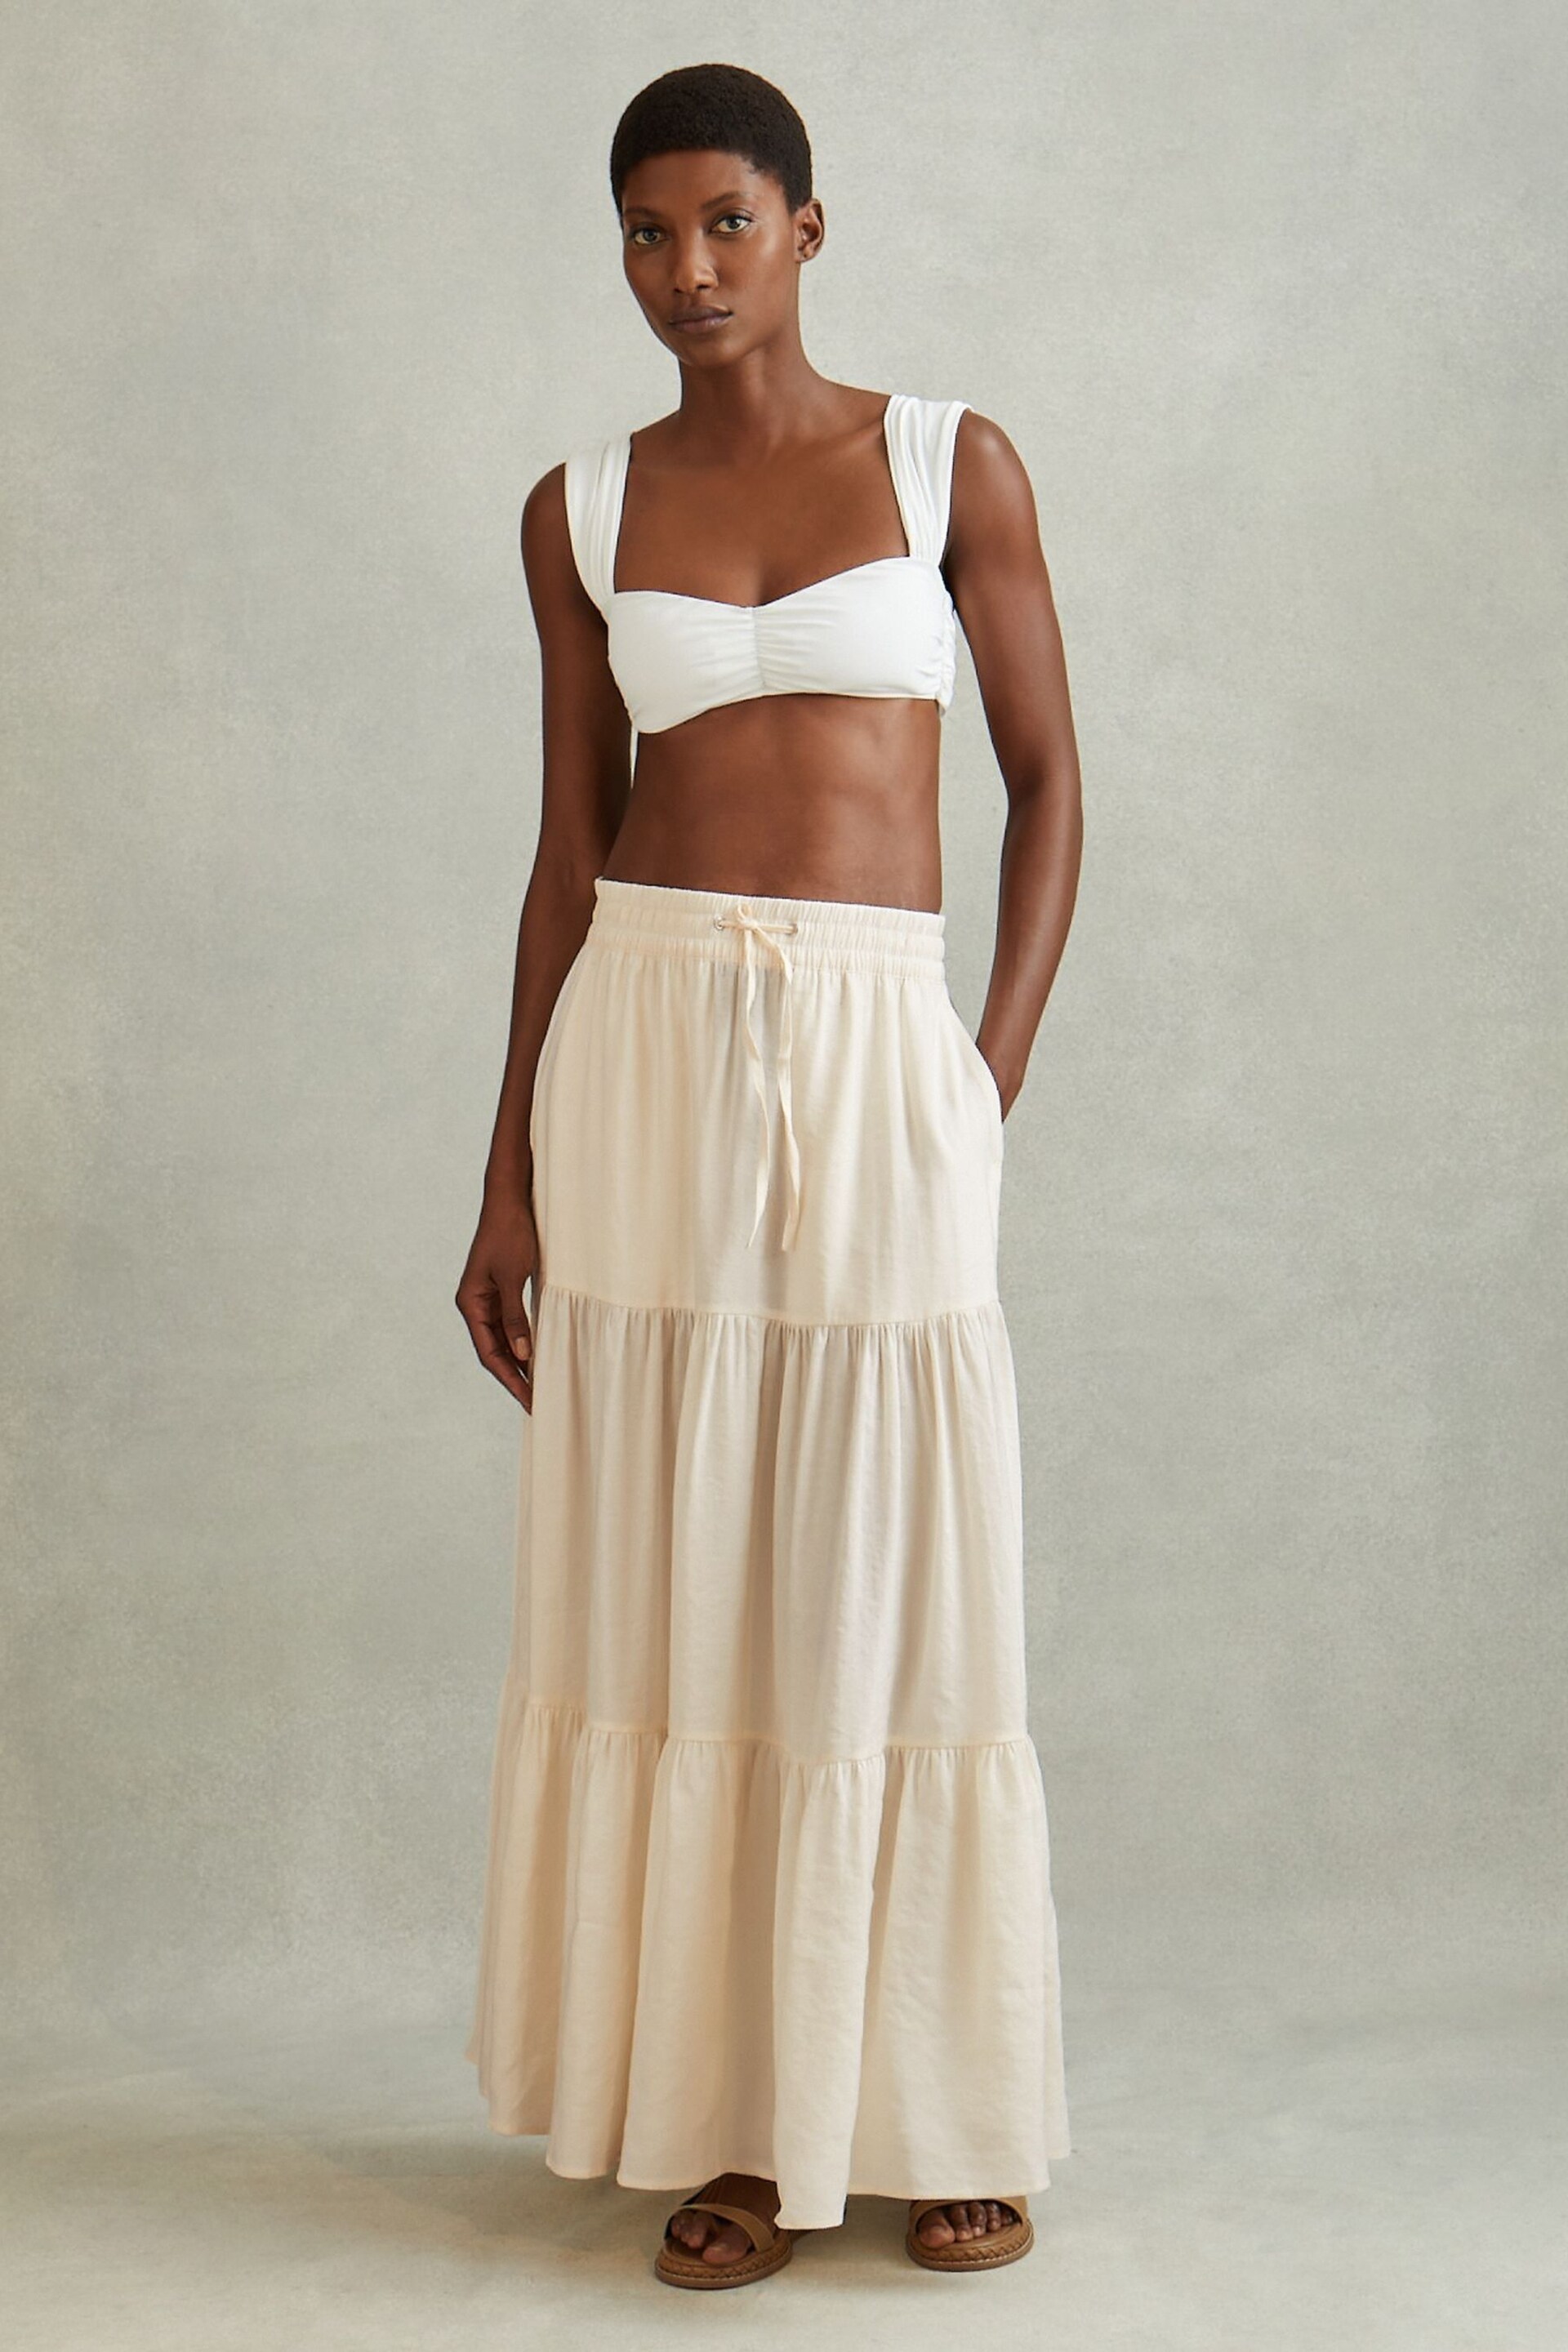 Reiss Neutral Tammy Tiered Drawstring Maxi Skirt - Image 4 of 6